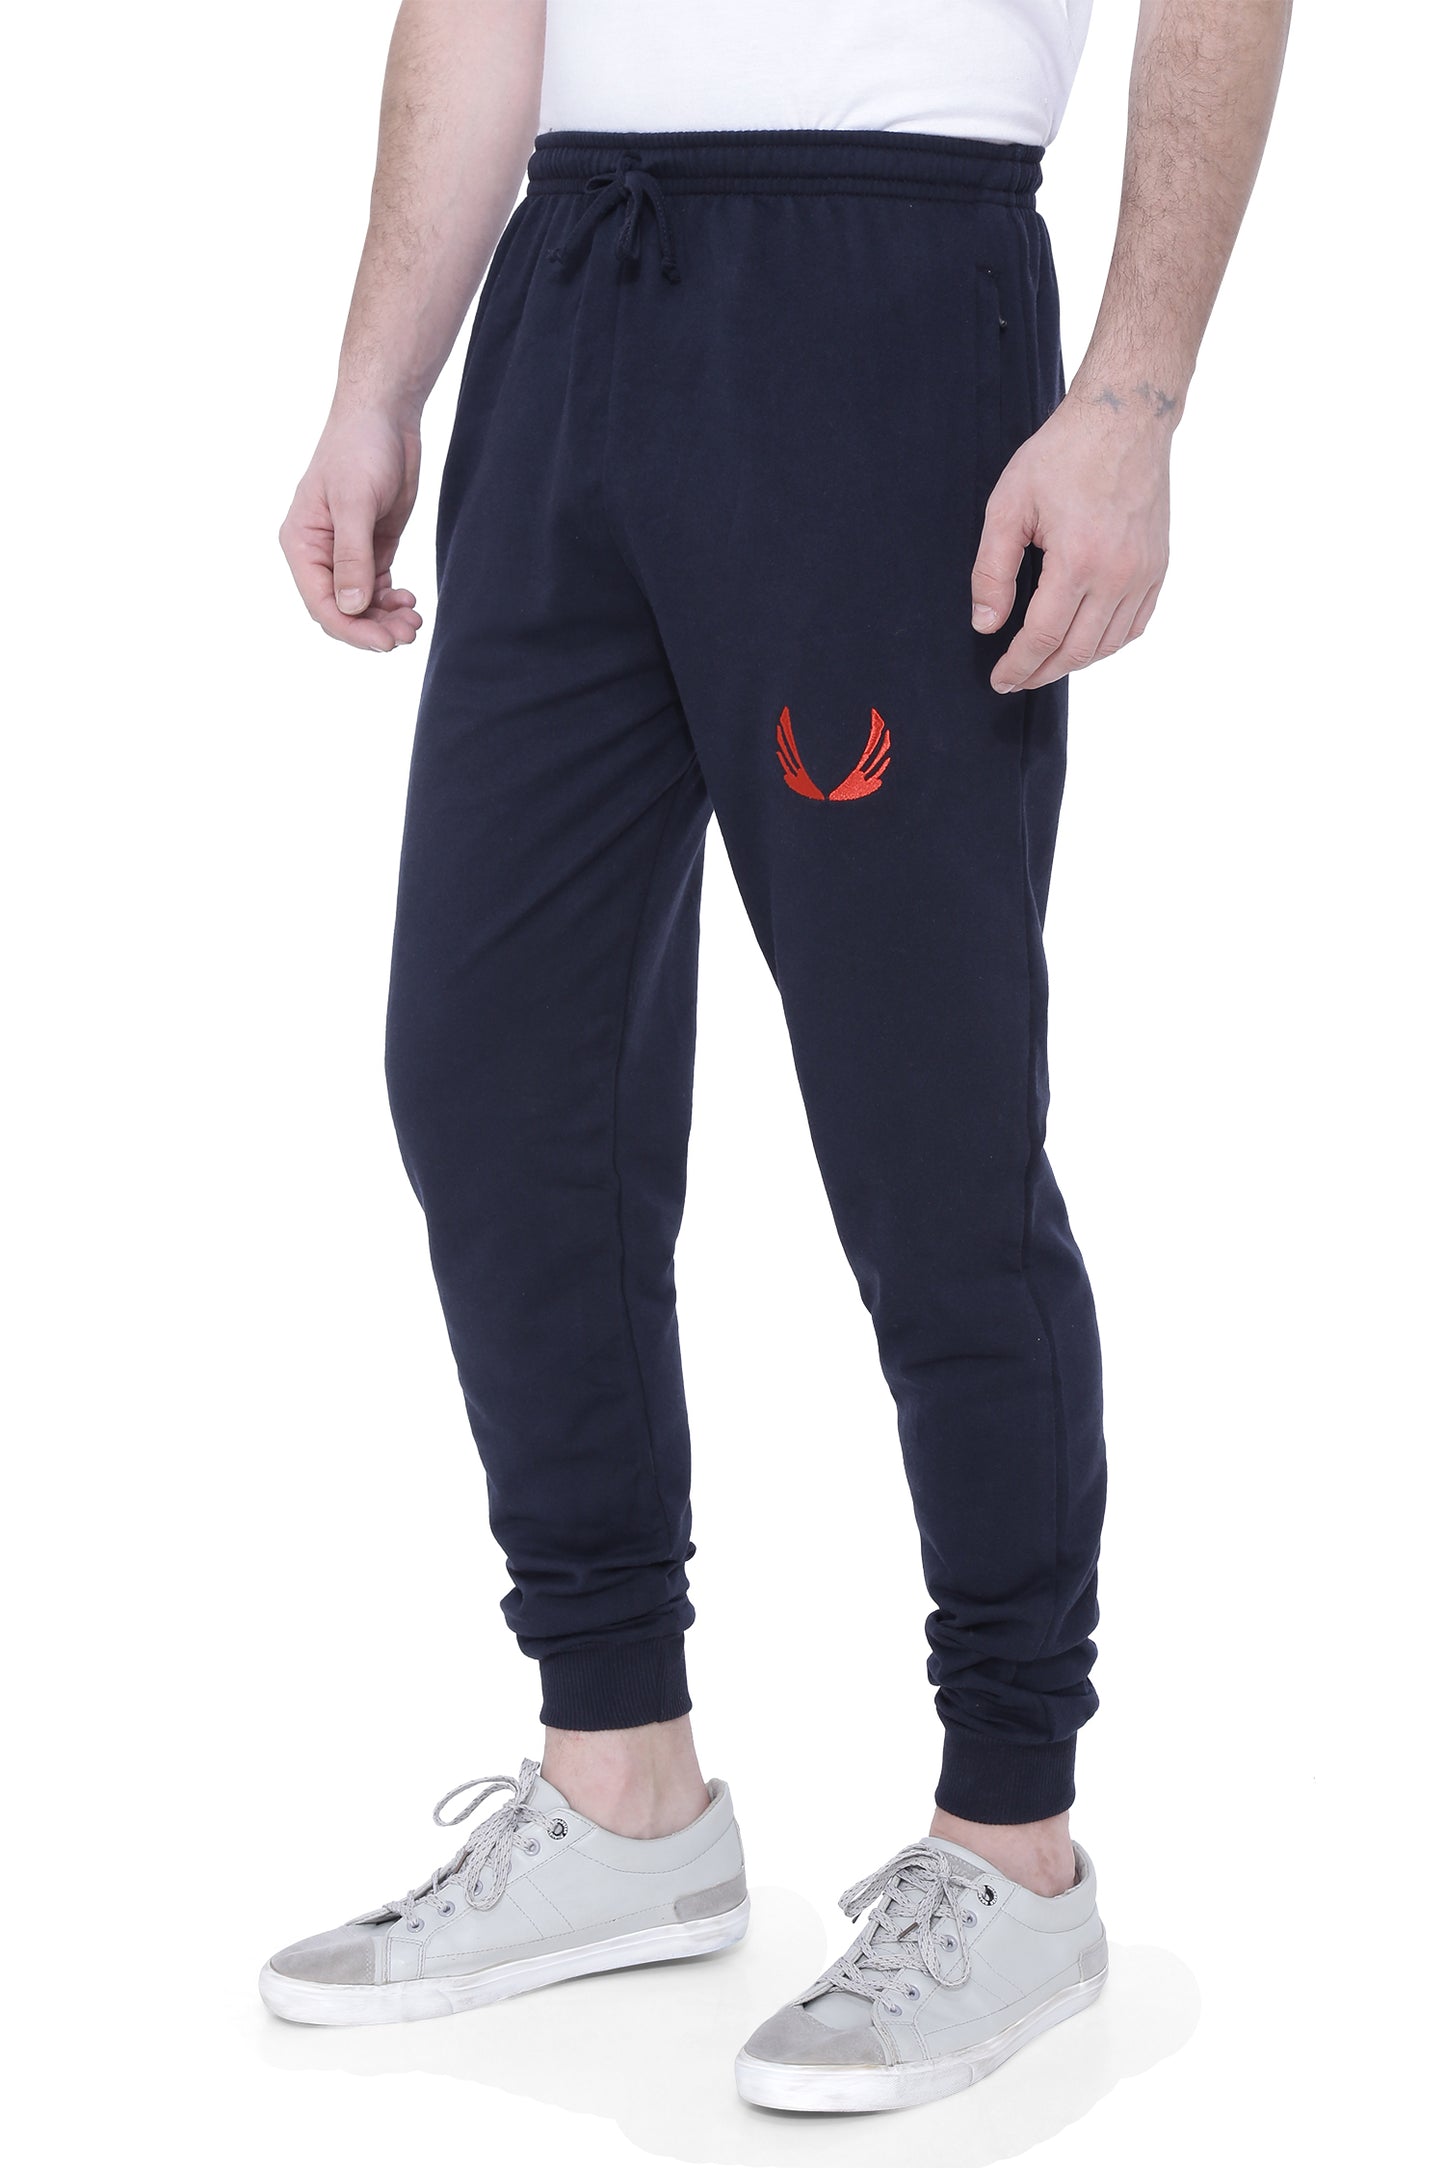 Neo Garments Men's Cotton Sweatpants - Navy Blue | SIZES FROM M TO 7XL.